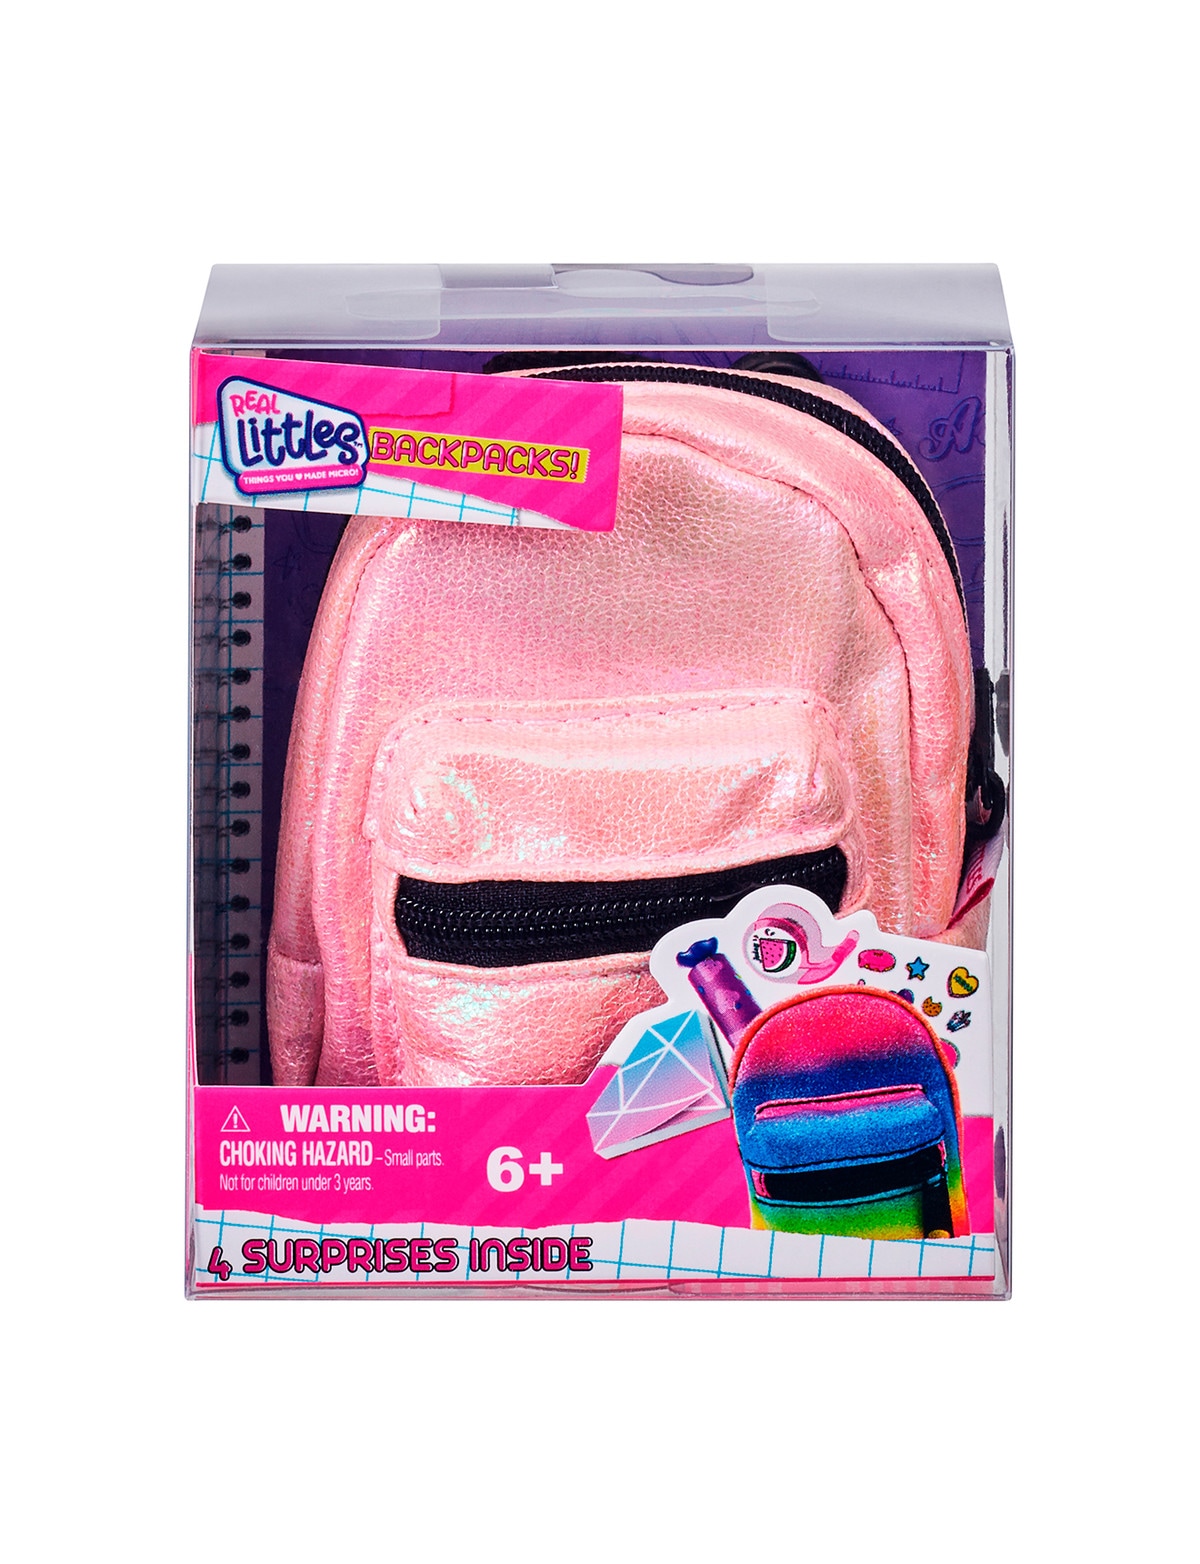 REAL LITTLES - Micro Backpack - 3 Pack with 18 Stationary Surprises Inside!  - Styles May Vary